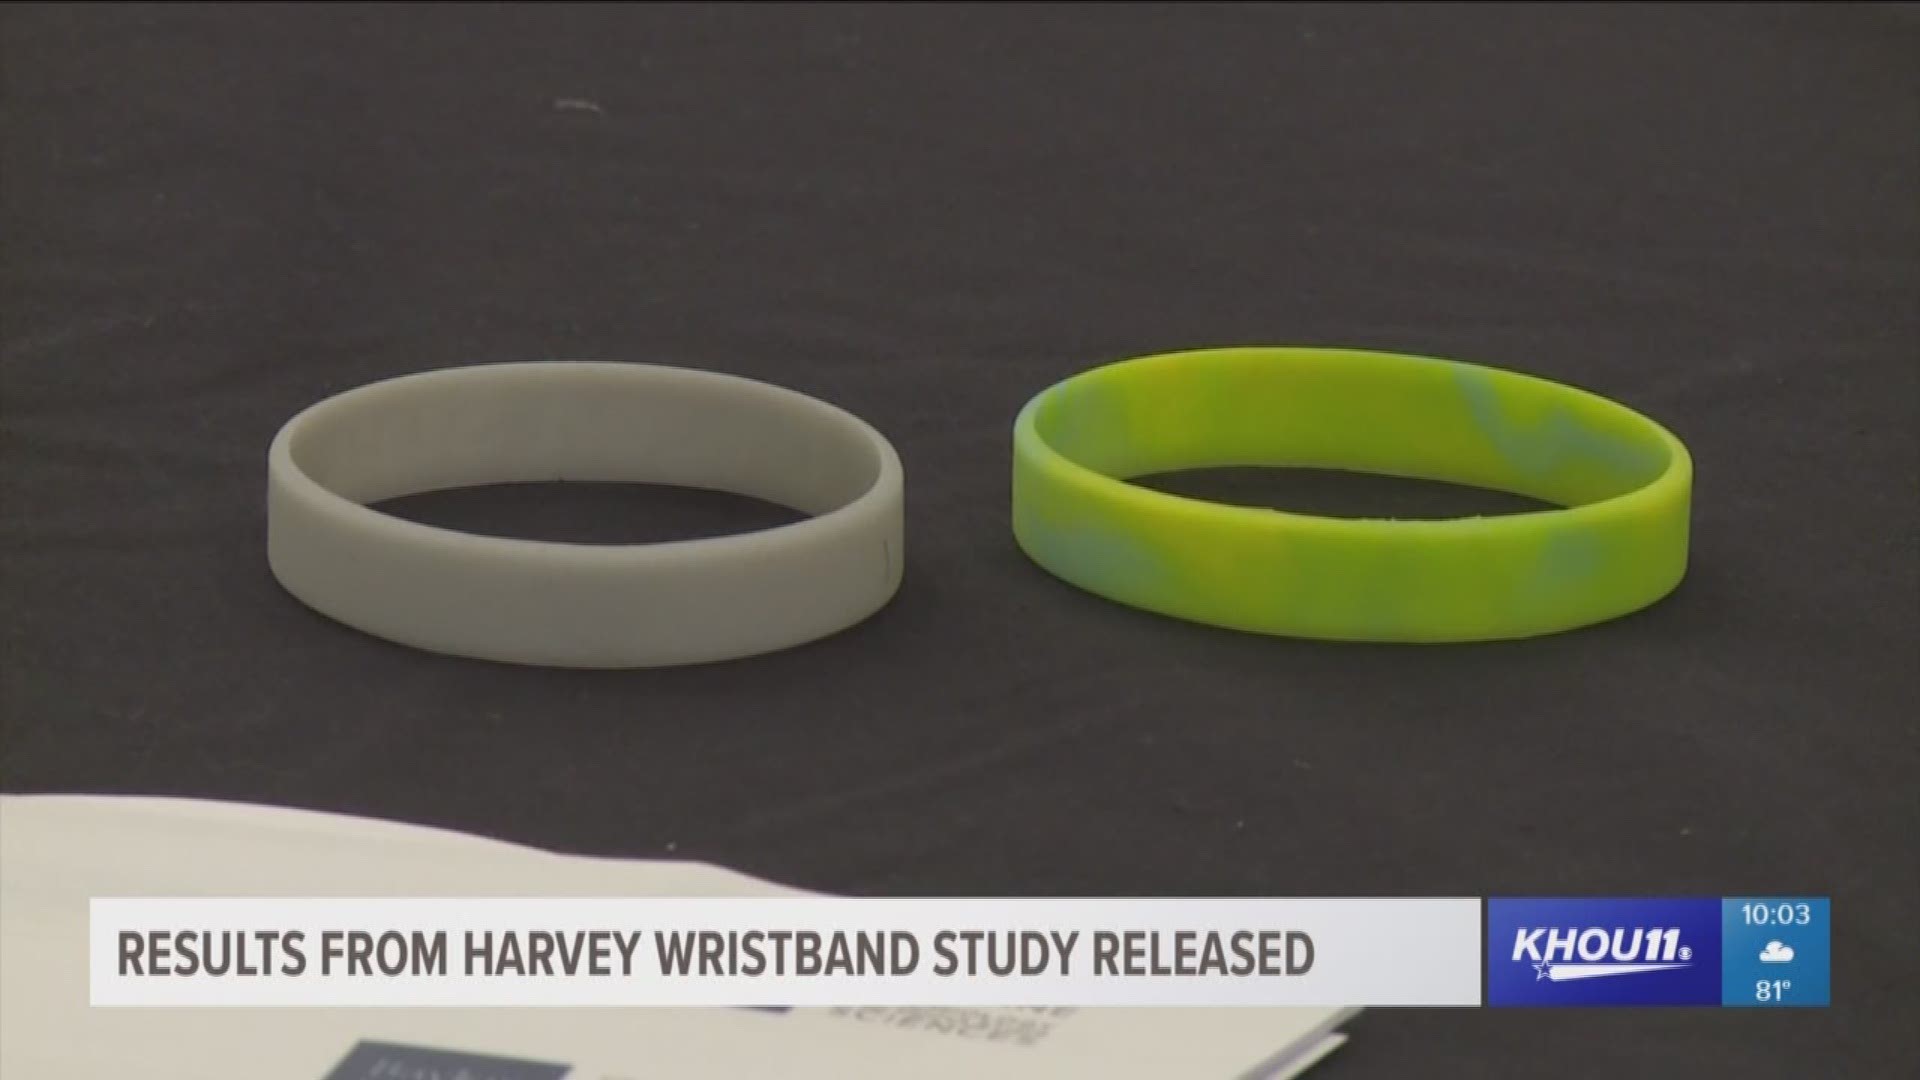 The results are in from a study done after Hurricane Harvey. It tracked chemical exposure through wristbands and it's the first of several studies conducted in the Houston area.